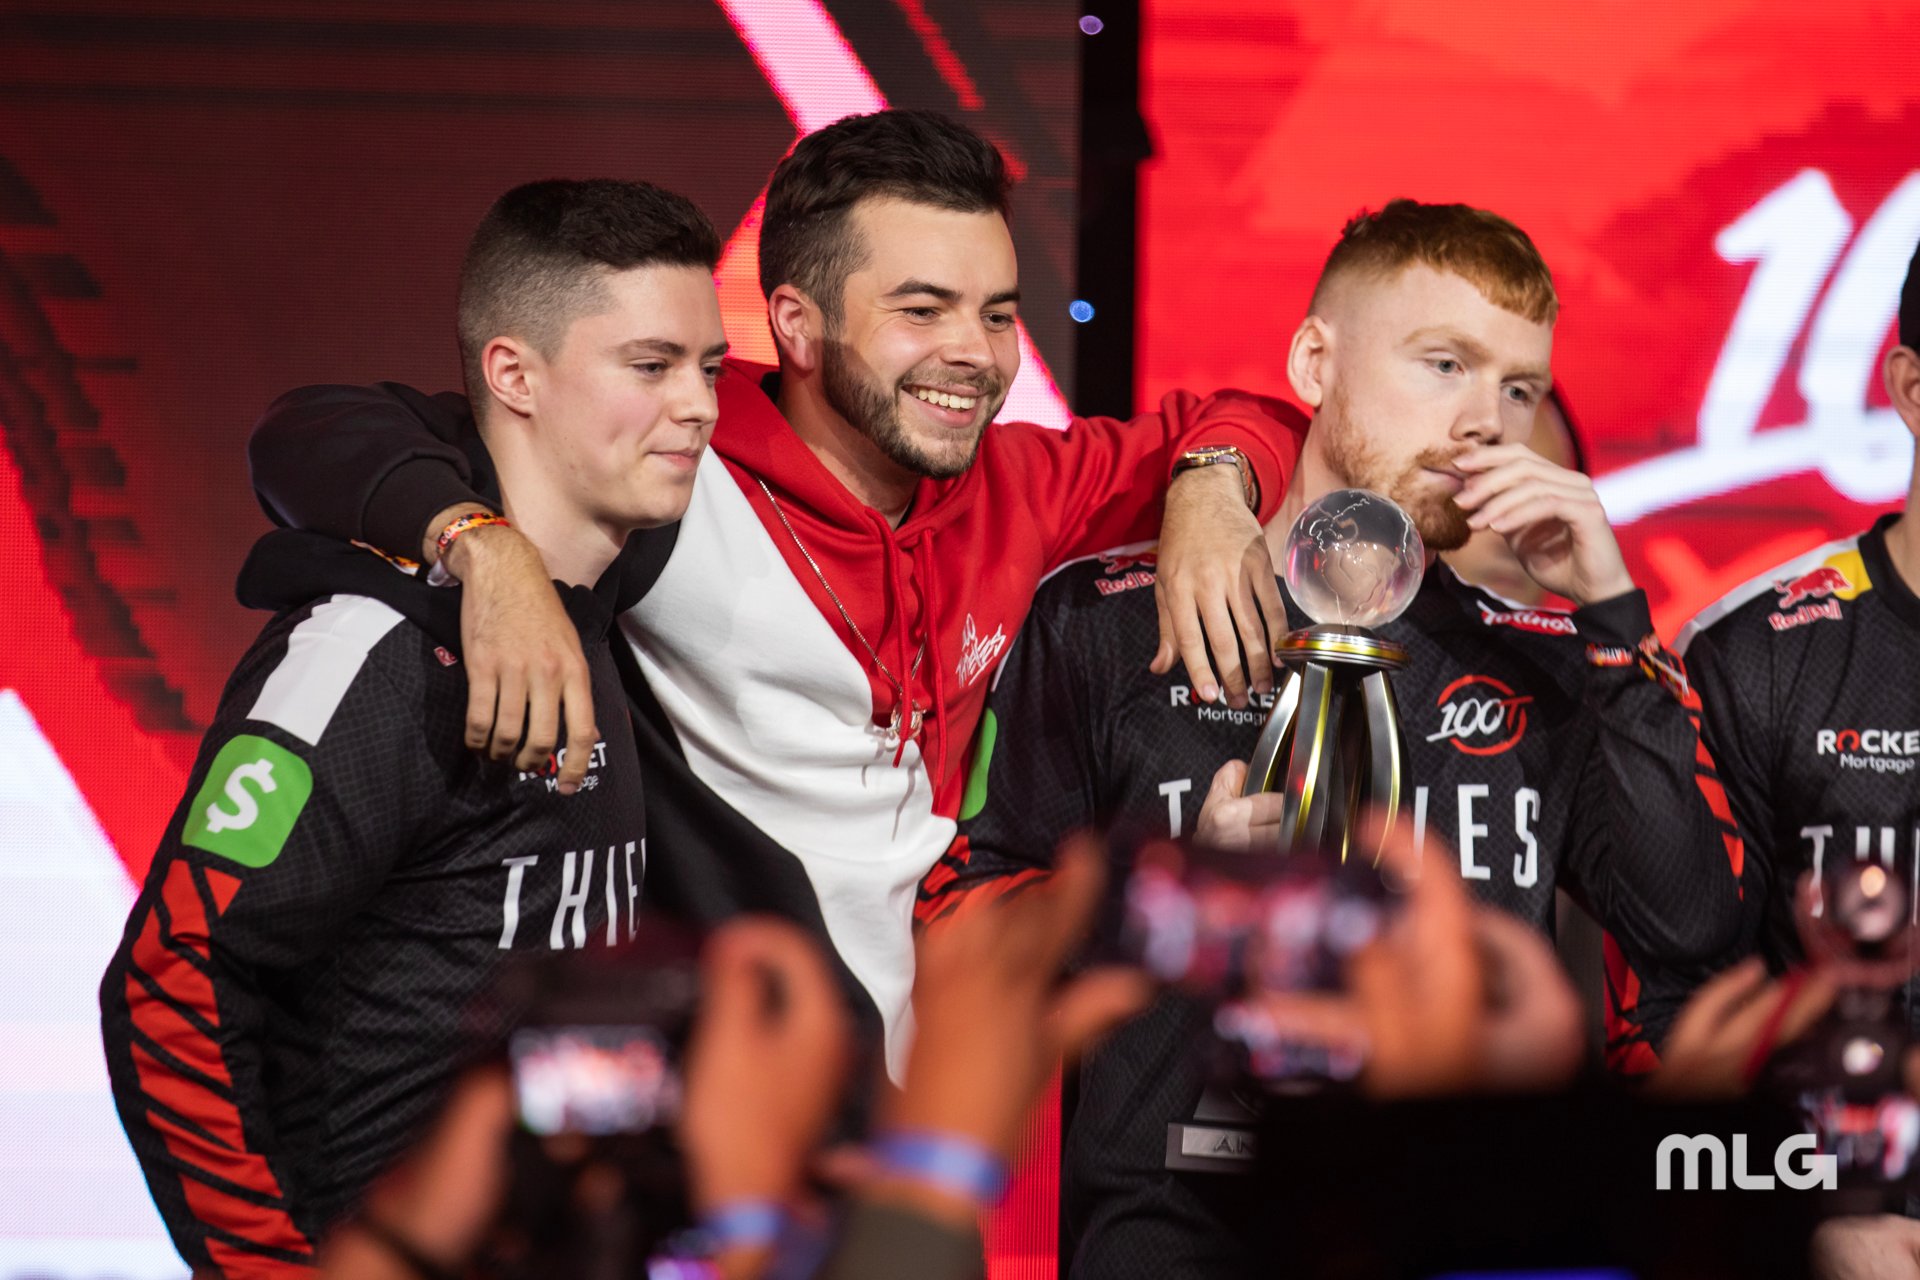 Nadeshot with his arms around CoD pros Enable and Priestahh after 100 Thieves won a CWL tournament.